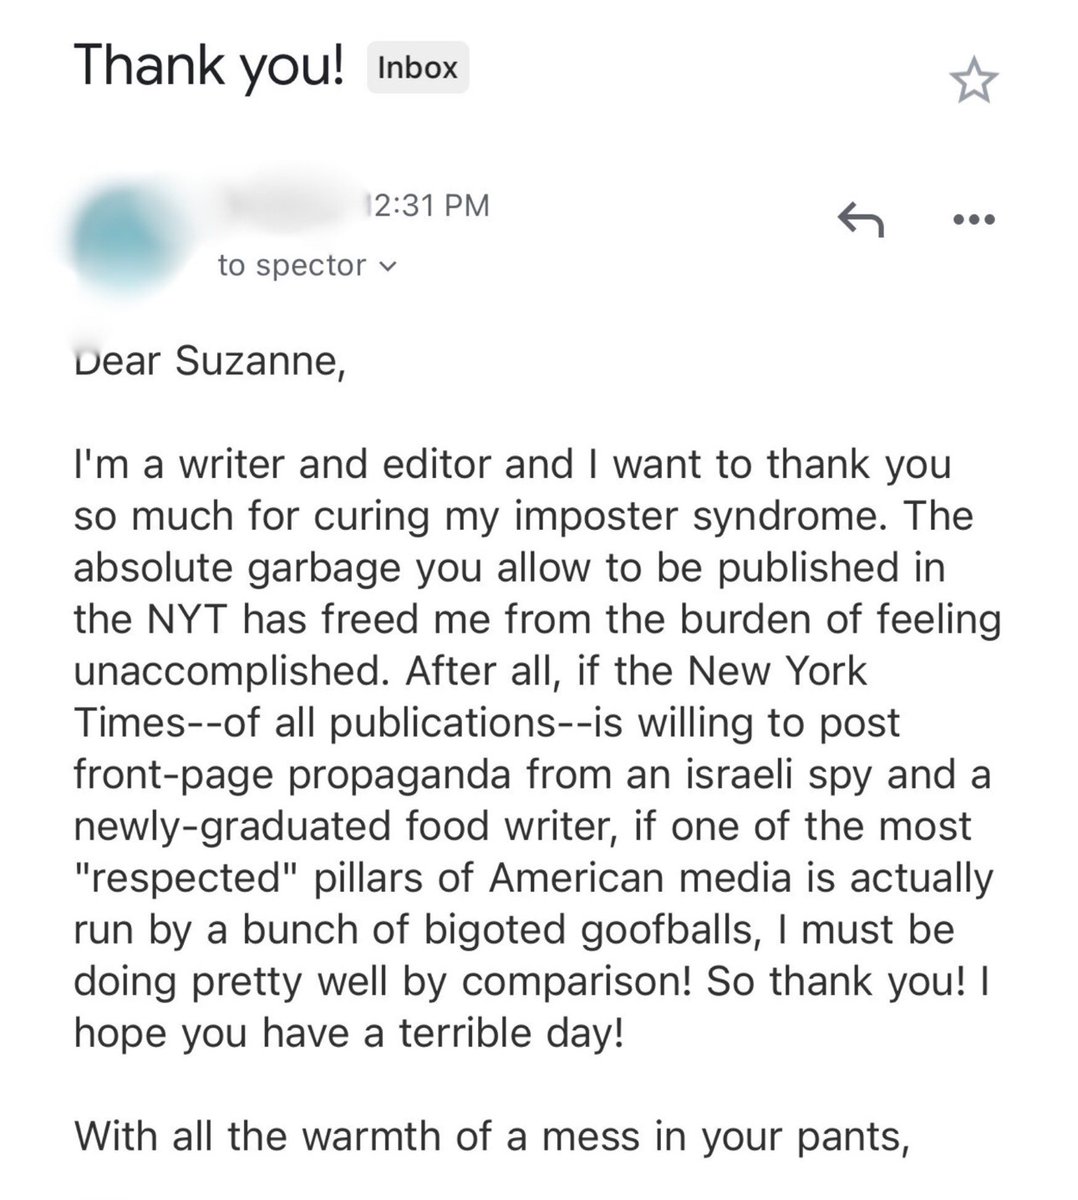 This email to The New York Times made my day.